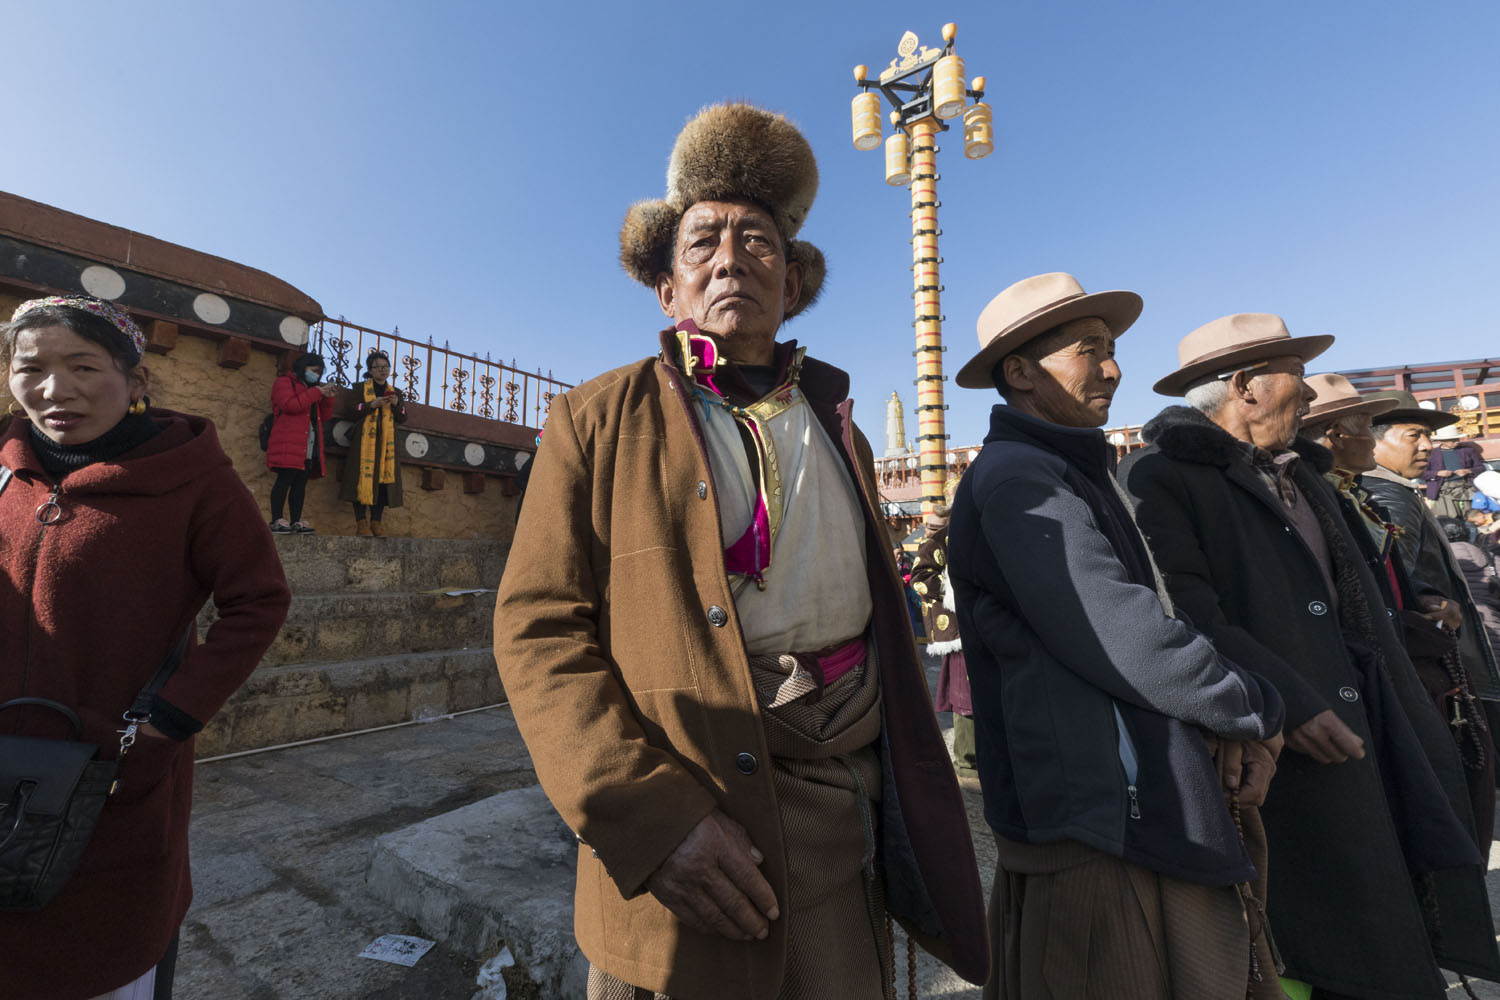 Man dressed in traditional Tibetan clothing at SongZangLin Monastery in JingXiang Village. Yunnan, China. March 2, 2018.